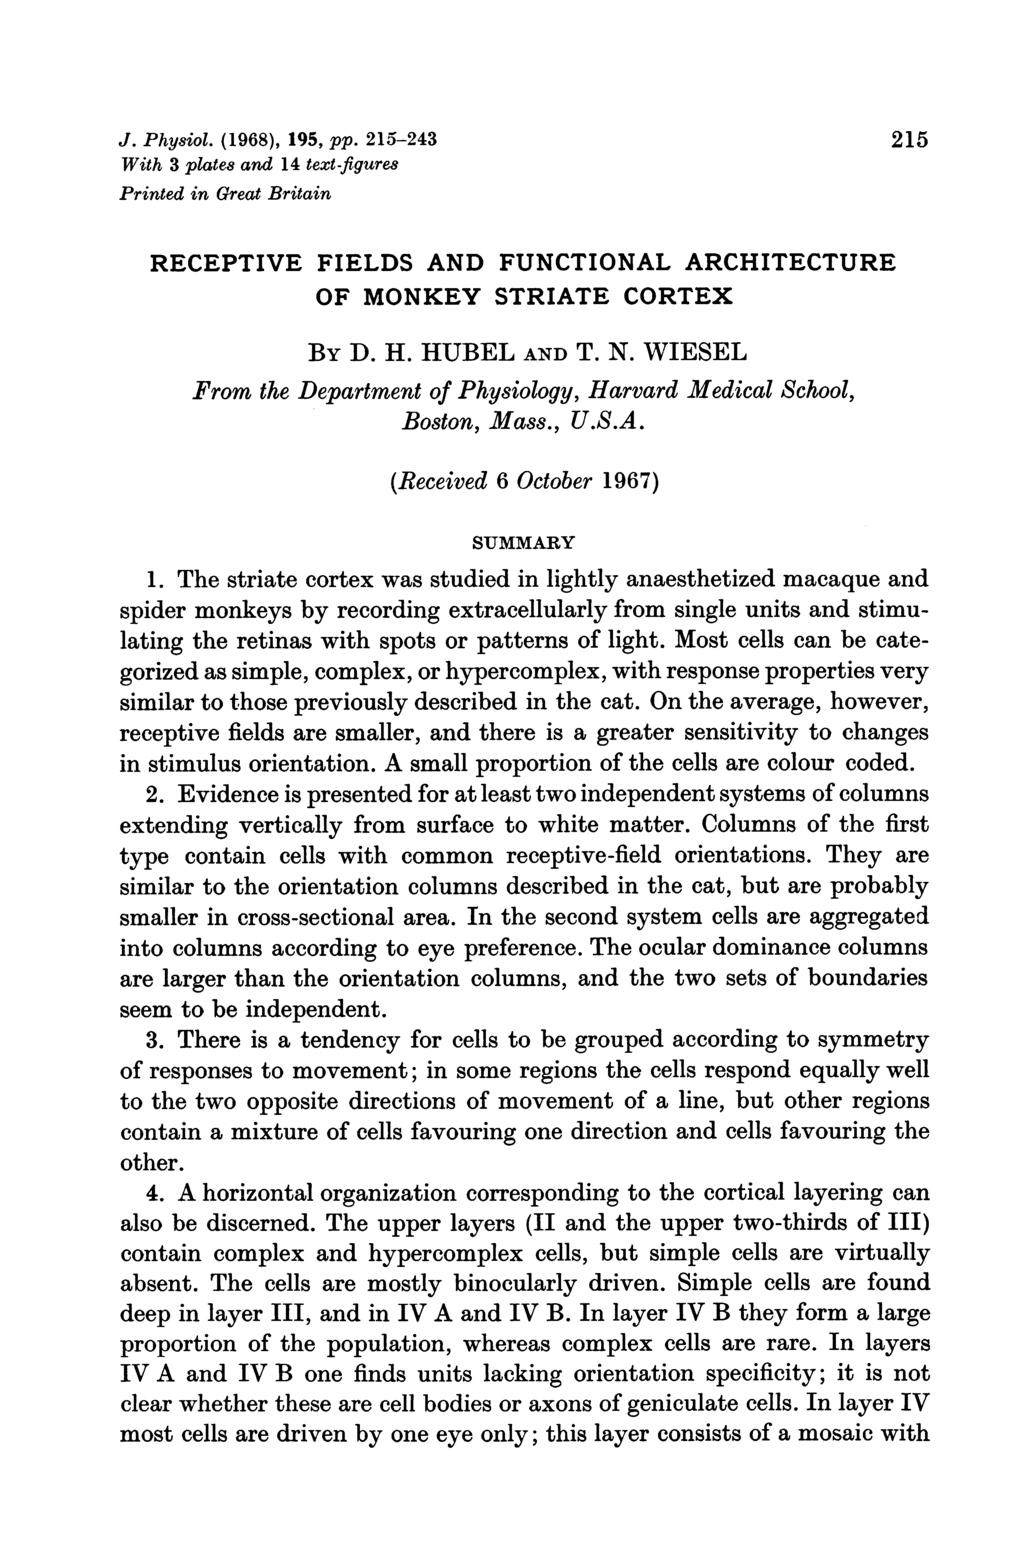 J. Physiol. (1968), 195, pp. 215-243 215 With 3 plates and 14 text-figures Printed in Great Britain RECEPTIVE FIELDS AND FUNCTIONAL ARCHITECTURE OF MONKEY STRIATE CORTEX By D. H. HUBEL AND T. N.